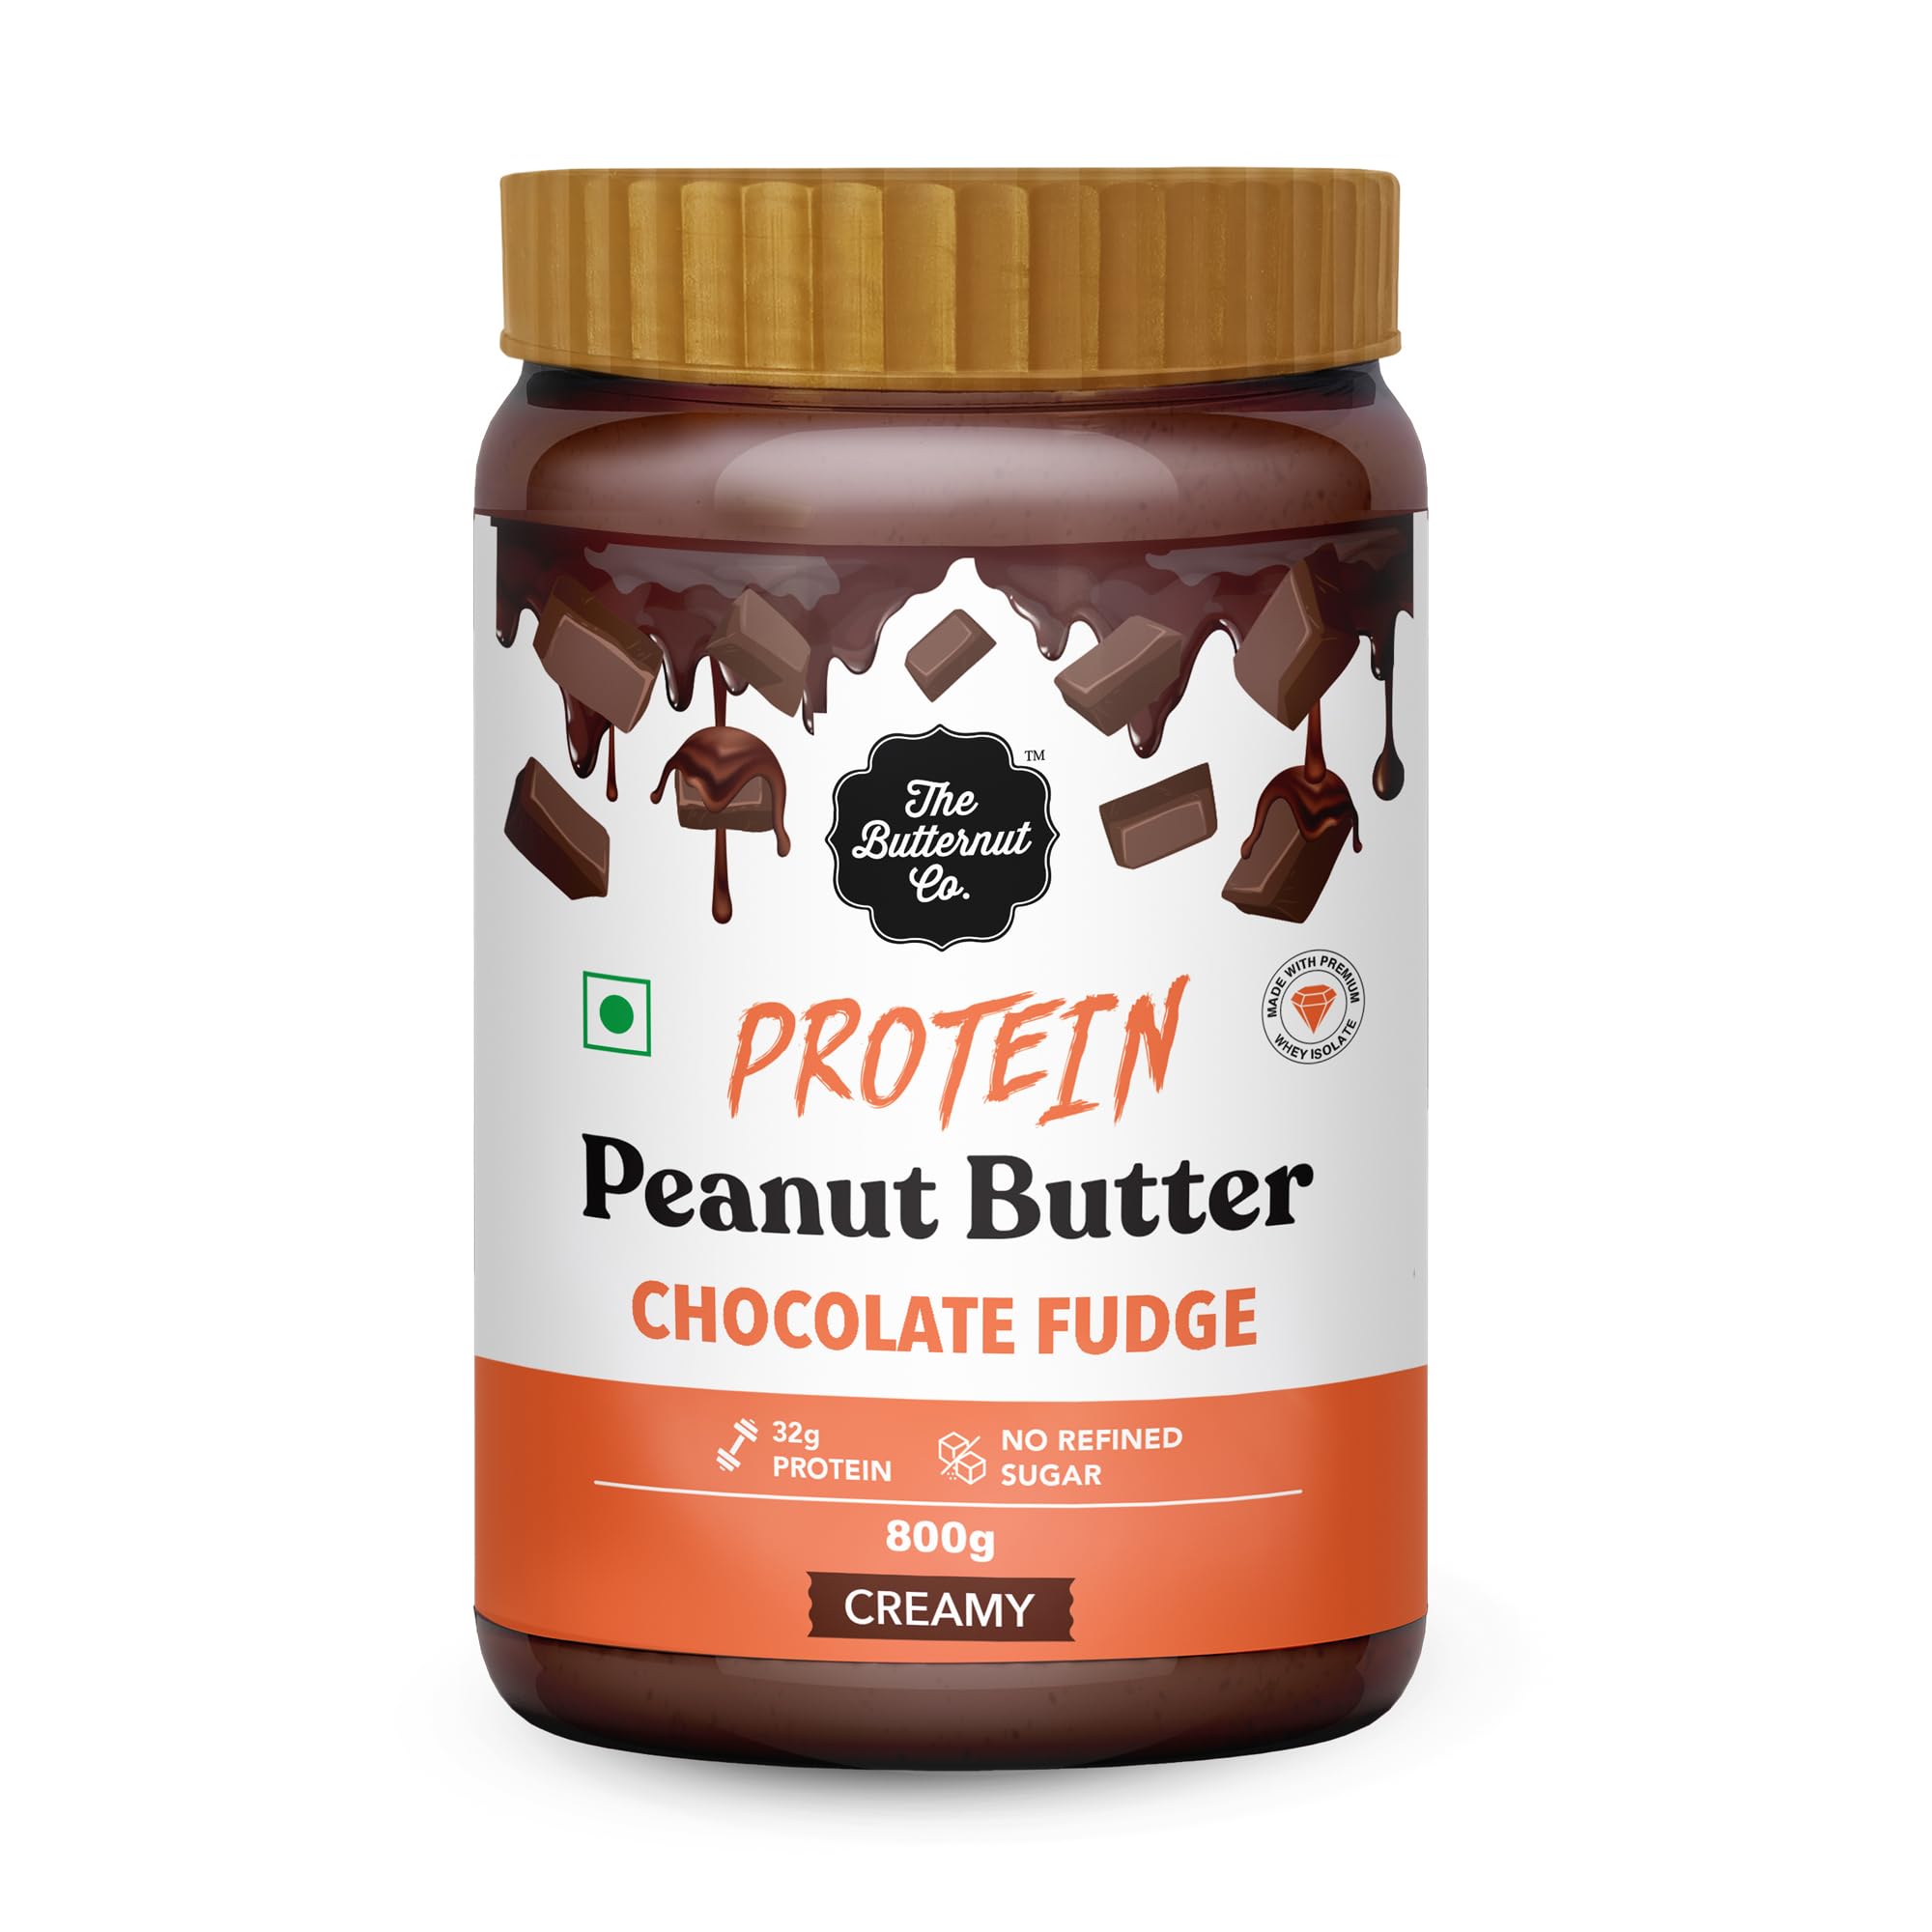 The Butternut Co. Protein Chocolate Fudge Peanut Butter,Creamy| 32 g Protein |No Refined Sugar|High Protein,Nutritious and Delicious Treat for Breakfast | All Natural | No Cholesterol - 800g (Pack of 1)